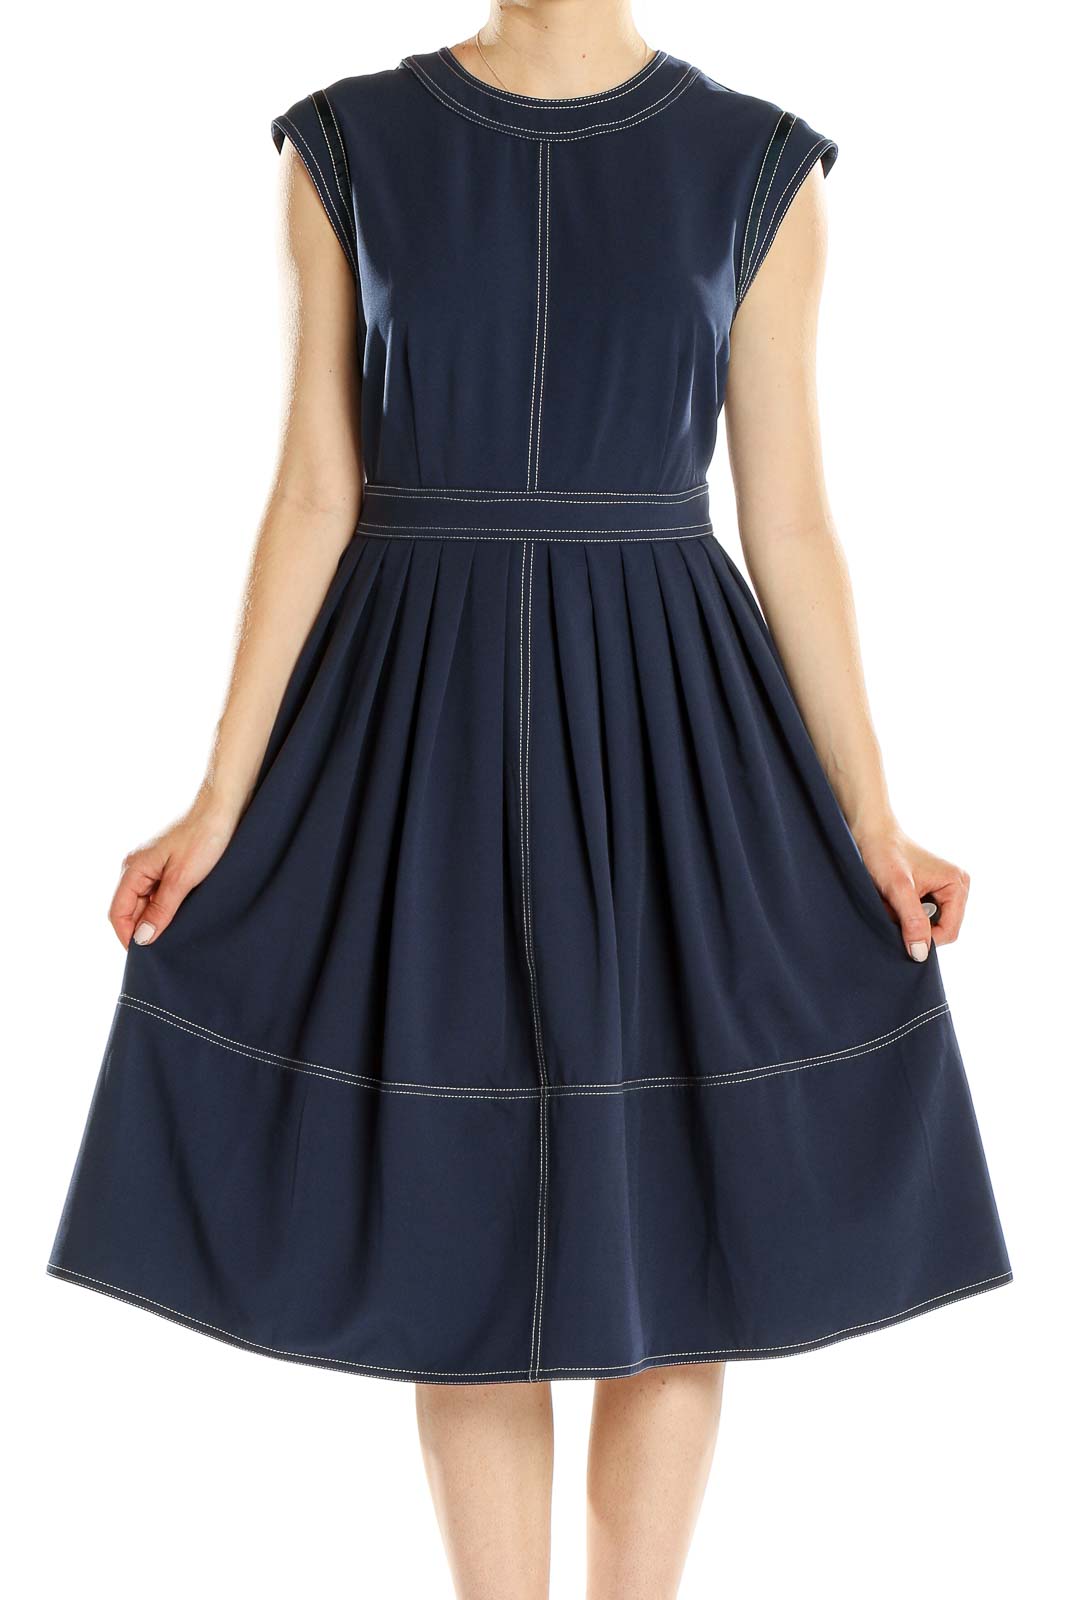 Blue Classic Fit & Flare Dress Front